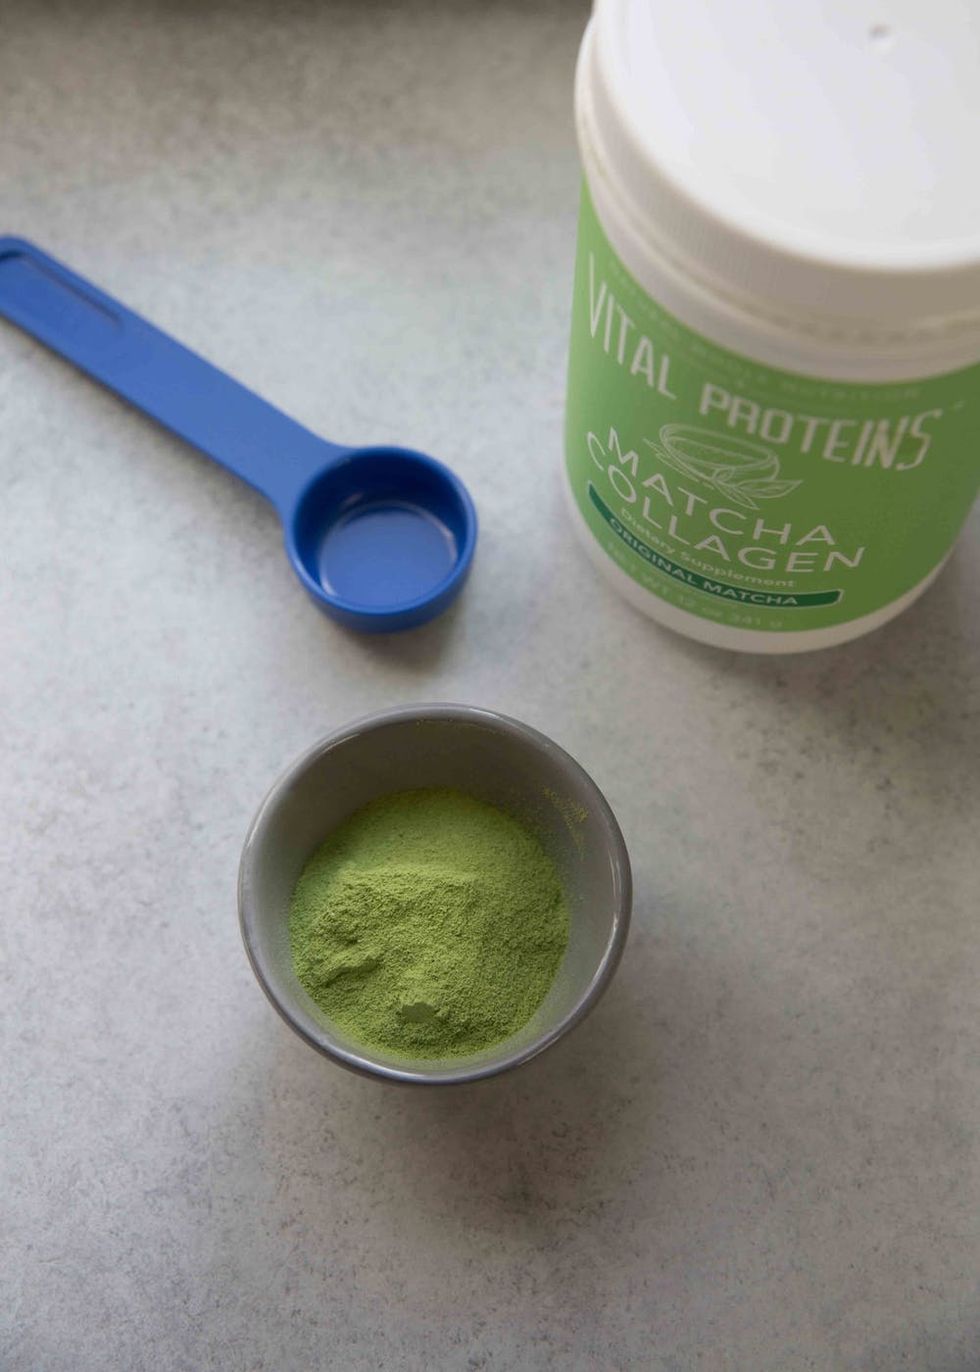 Matcha collagen is available in one size: 12 ounces.